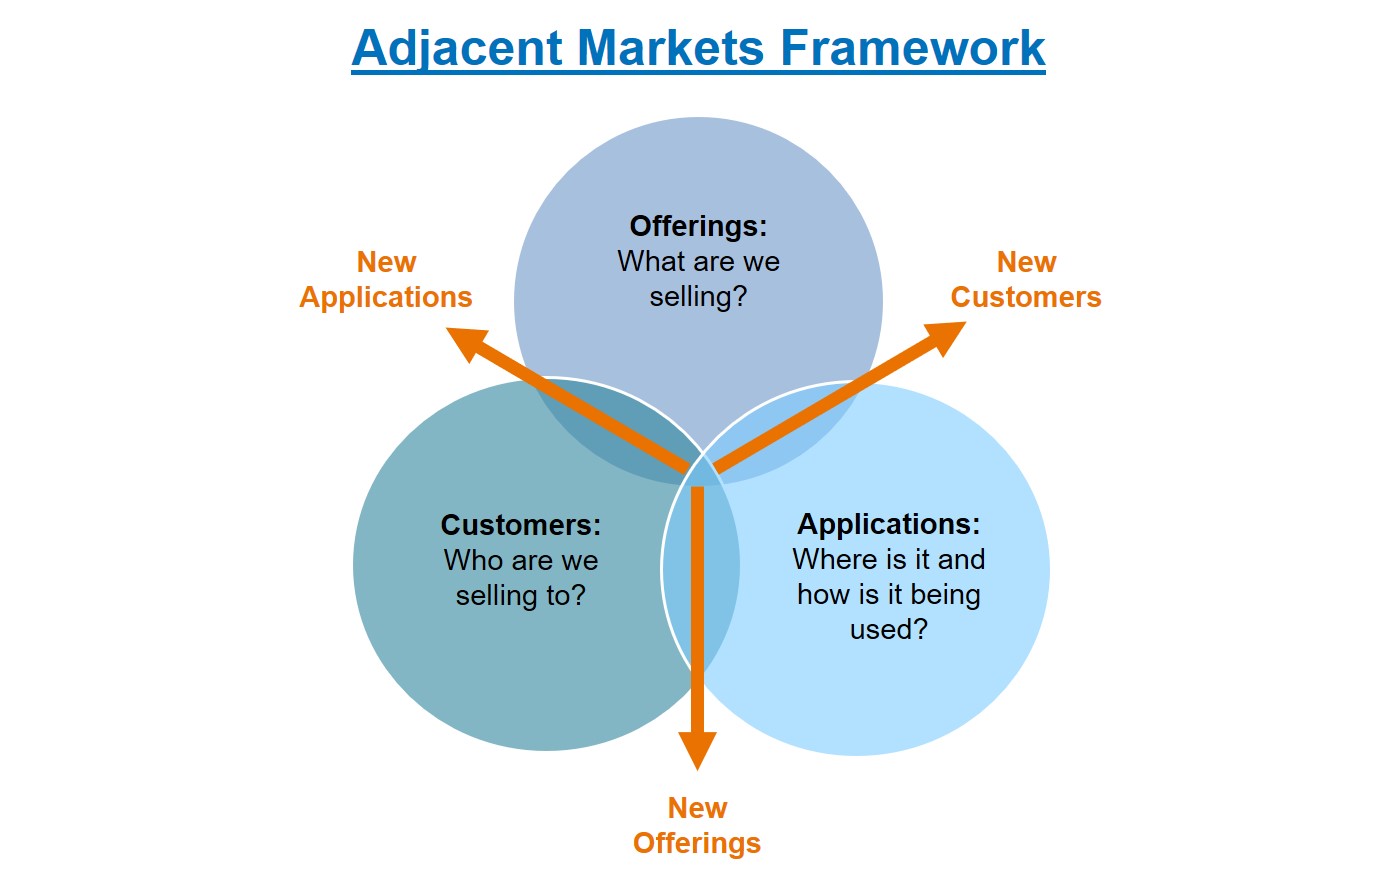 Expanding into Adjacent Markets: A Strategic Growth Hacking Move